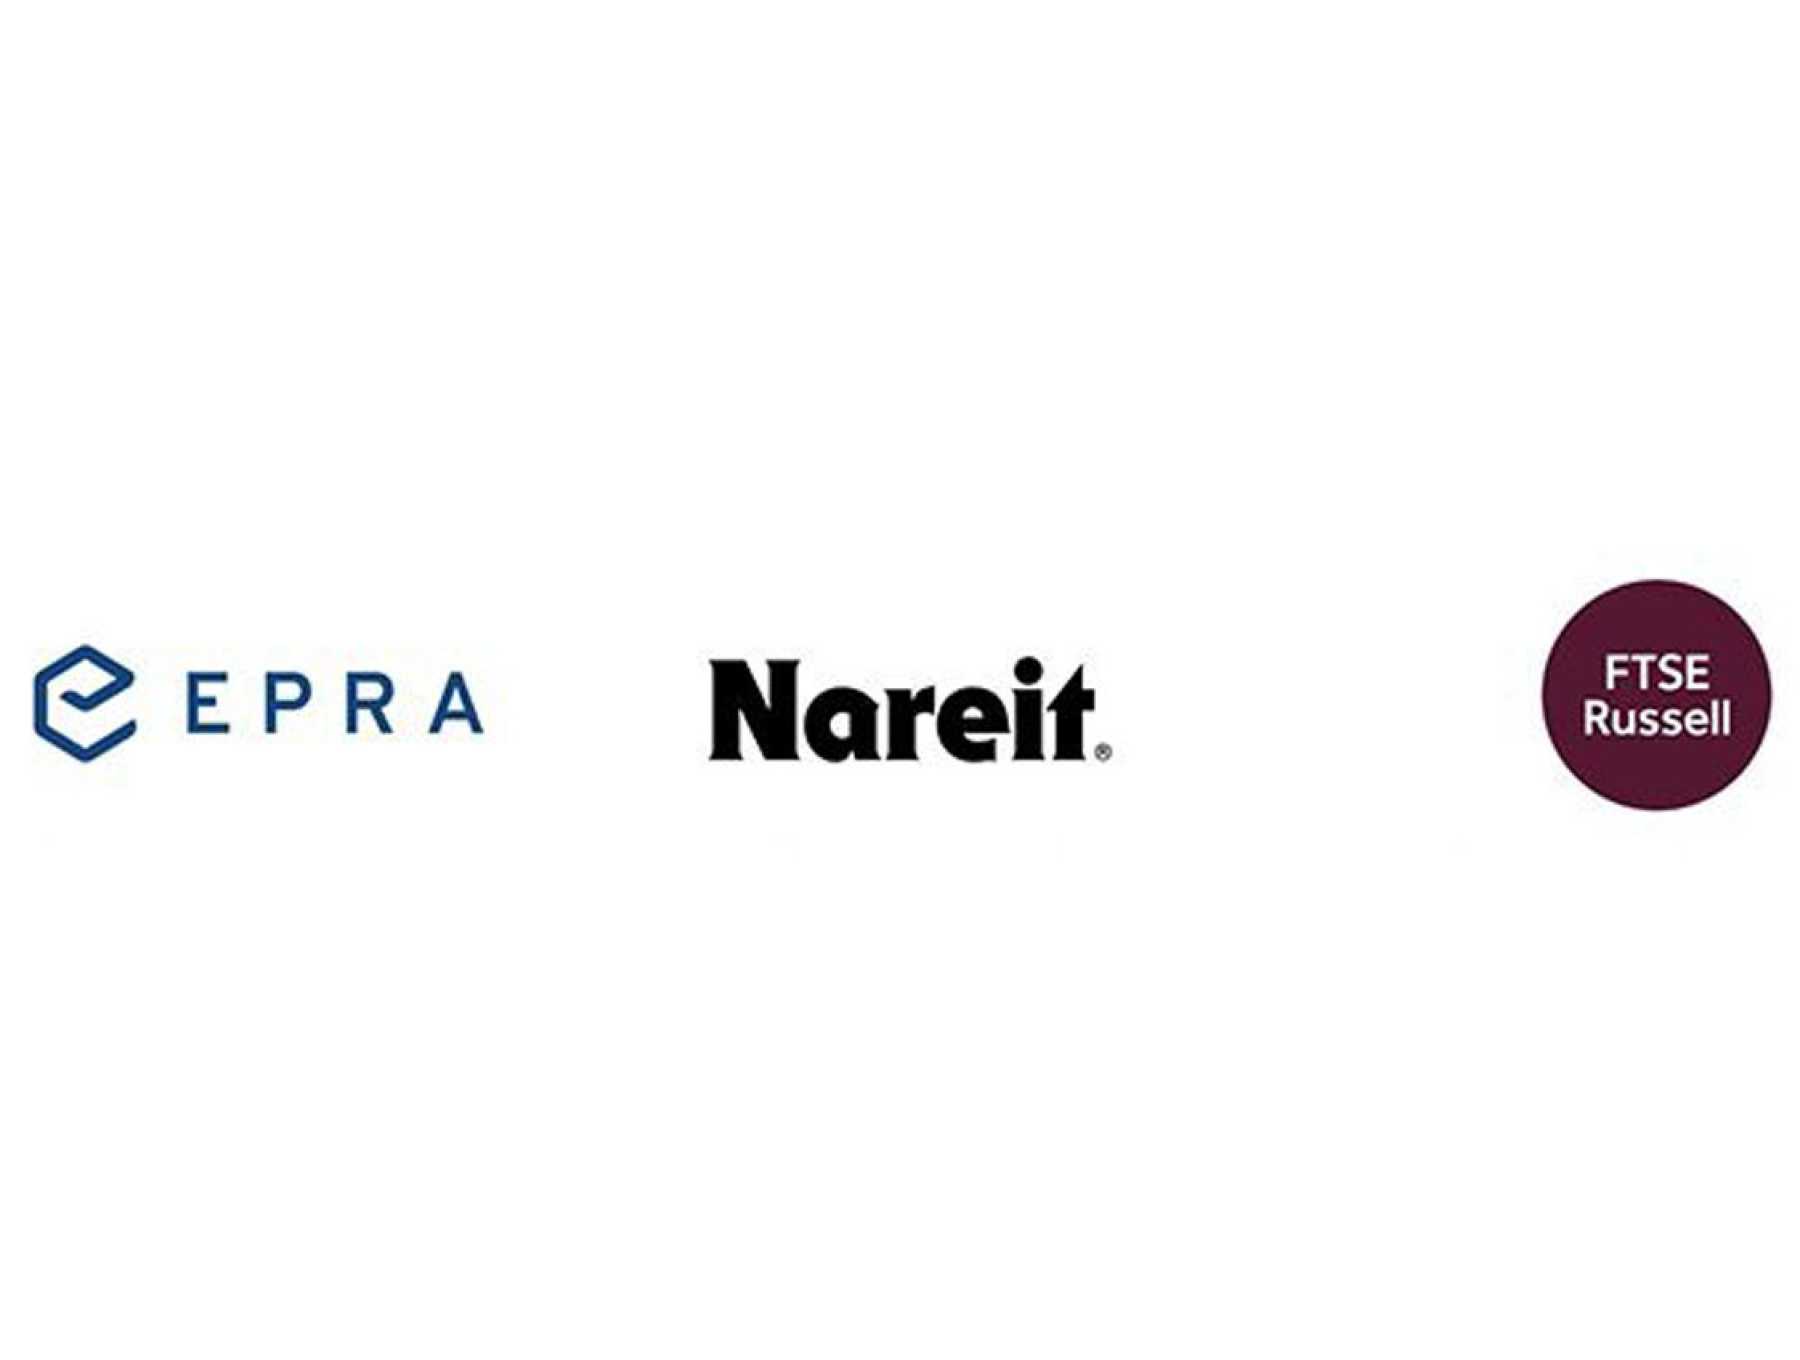 One United Properties shares will be included in the FTSE EPRA Nareit EMEA Emerging index as of June 20th